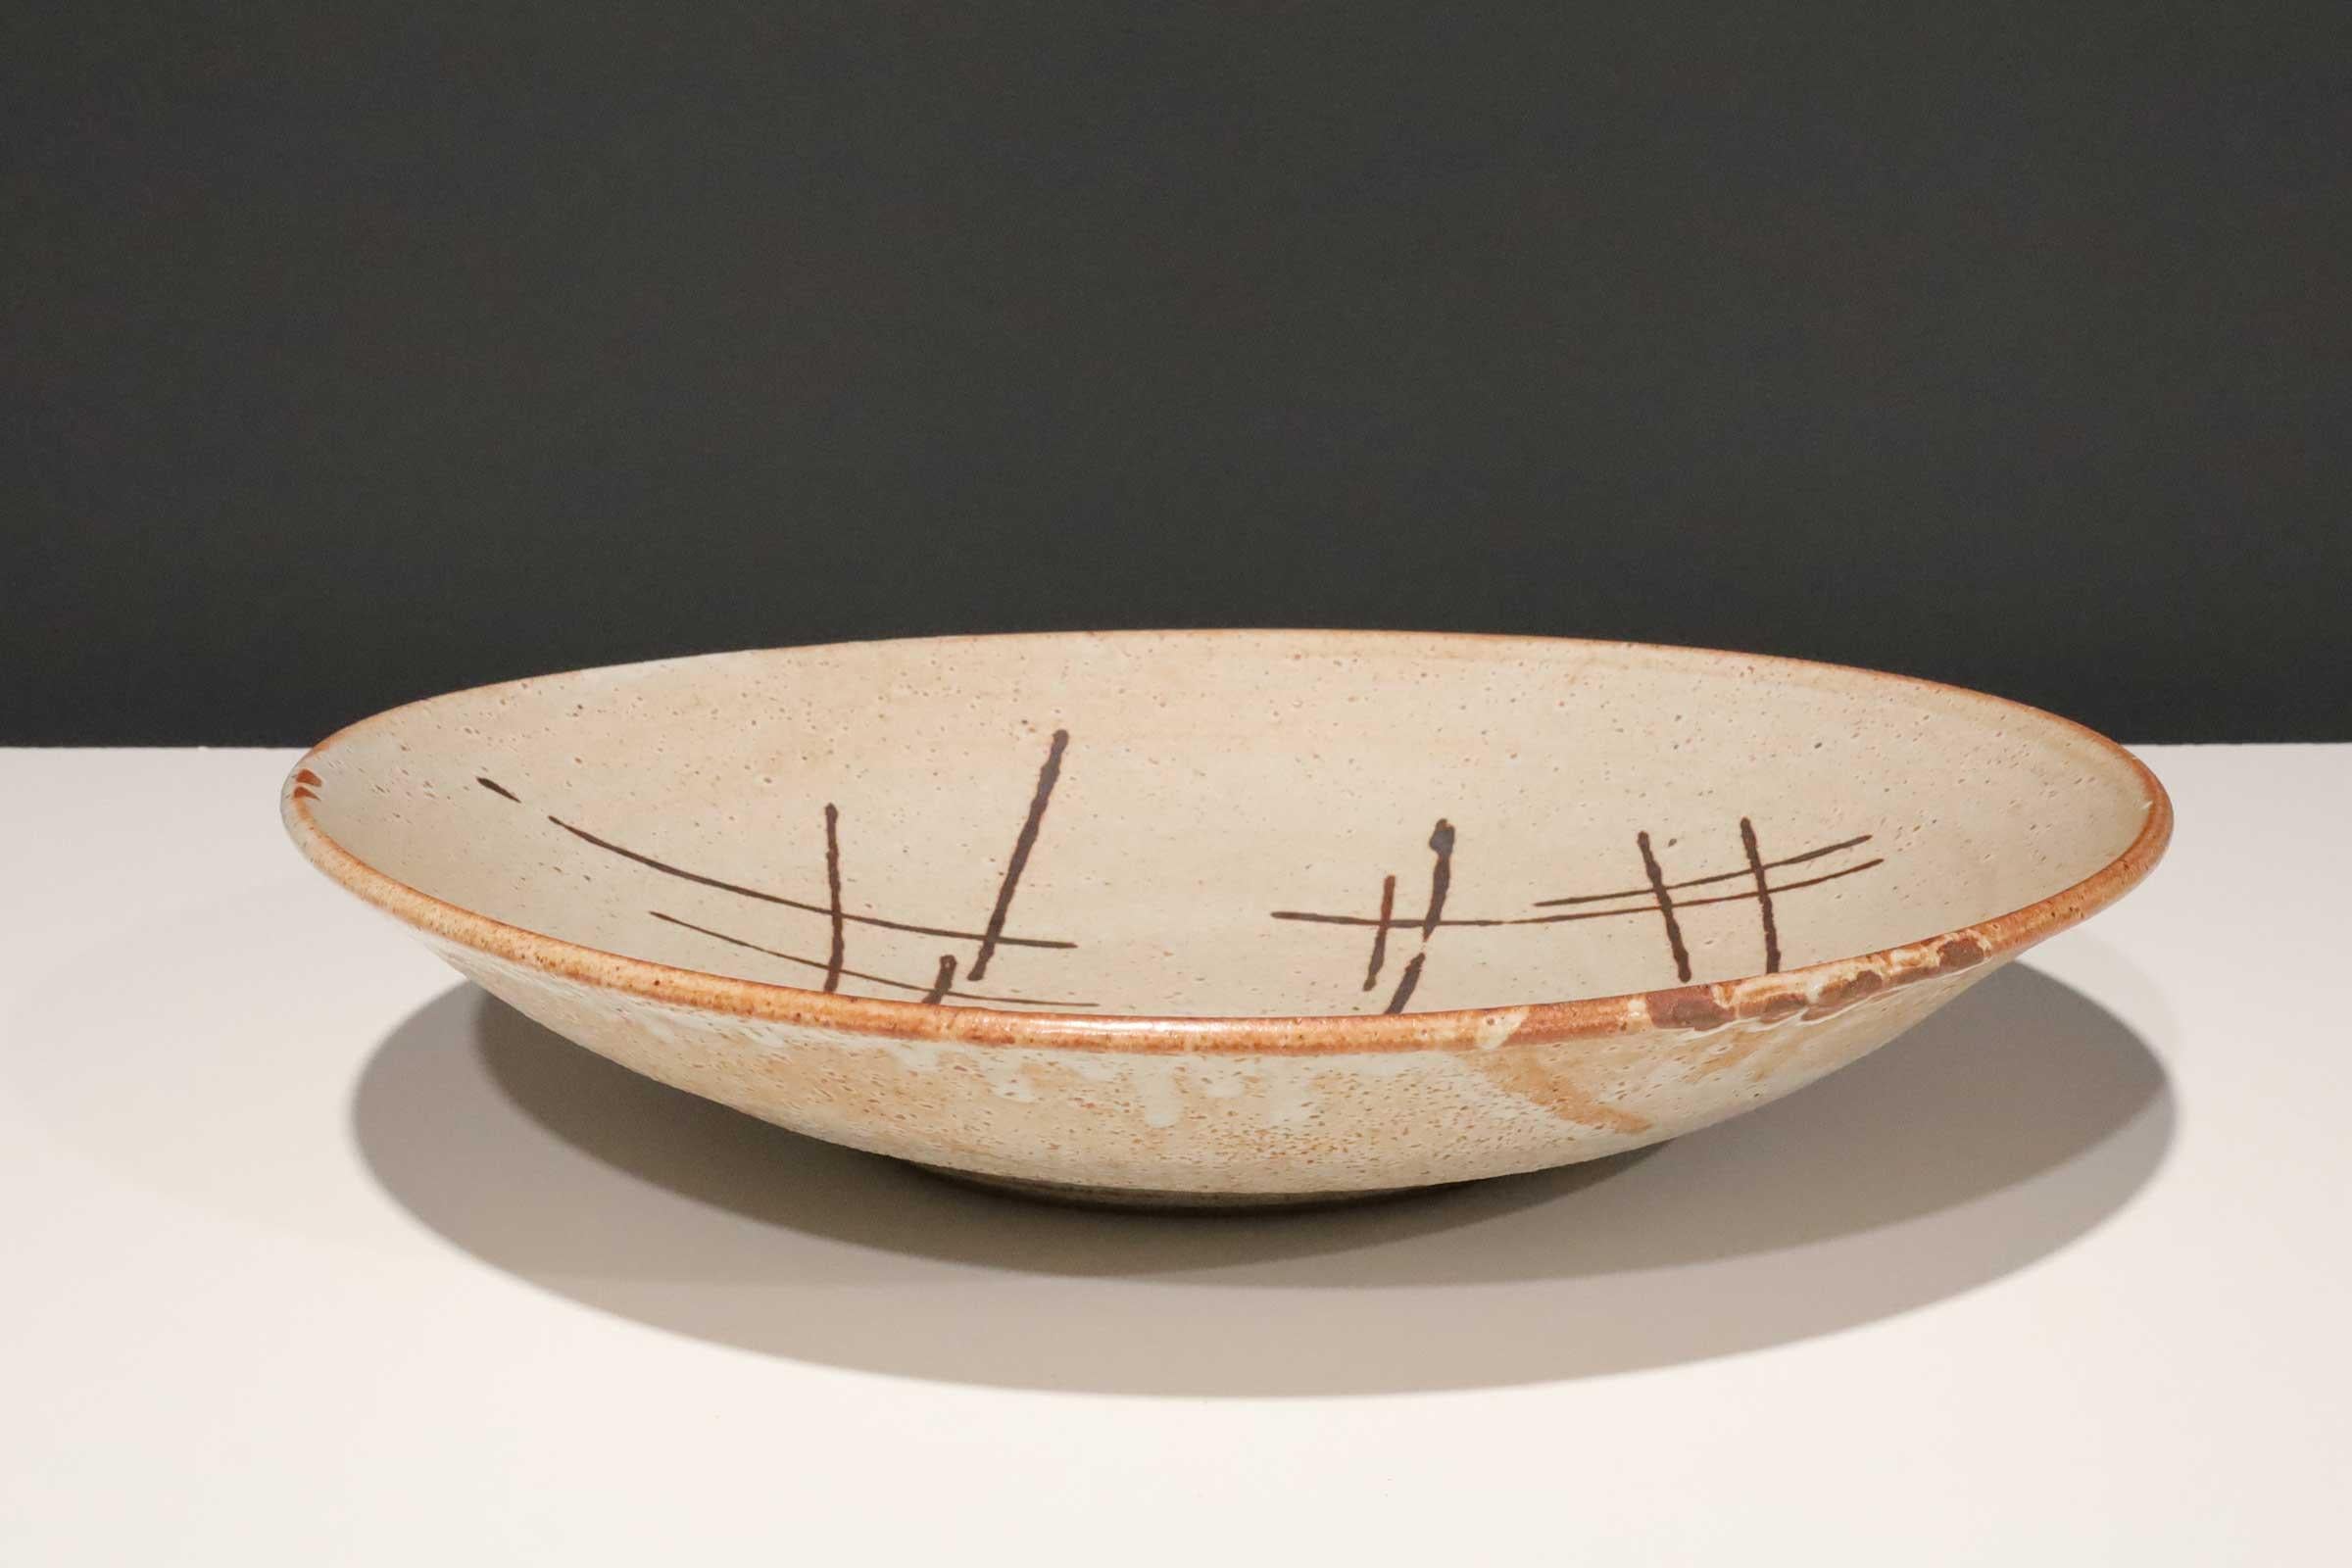 Large studio pottery platter with brown decorative dashes. 

Warren MacKenzie is known for simple, wheel-thrown functional pottery influenced by Bernard Leach and the Japanese aesthetic of the work of Shoji Hamada.

In 1950 MacKenzie and his